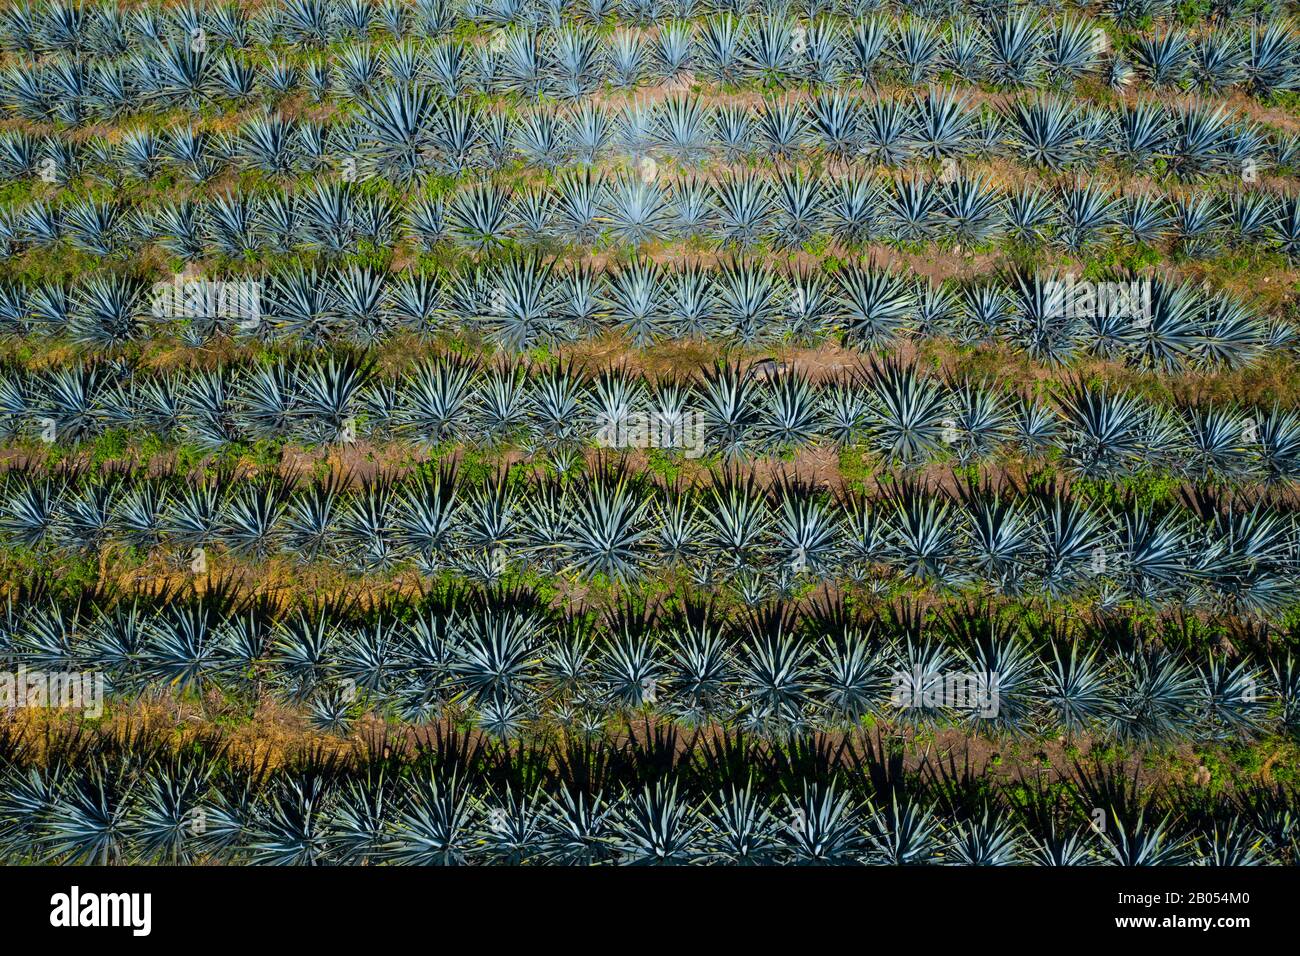 Blue agave, tequila agave, Agave tequilana, Tepic, Riviera Nayarit, Nayarit state, Mexico, Central America, America Stock Photo